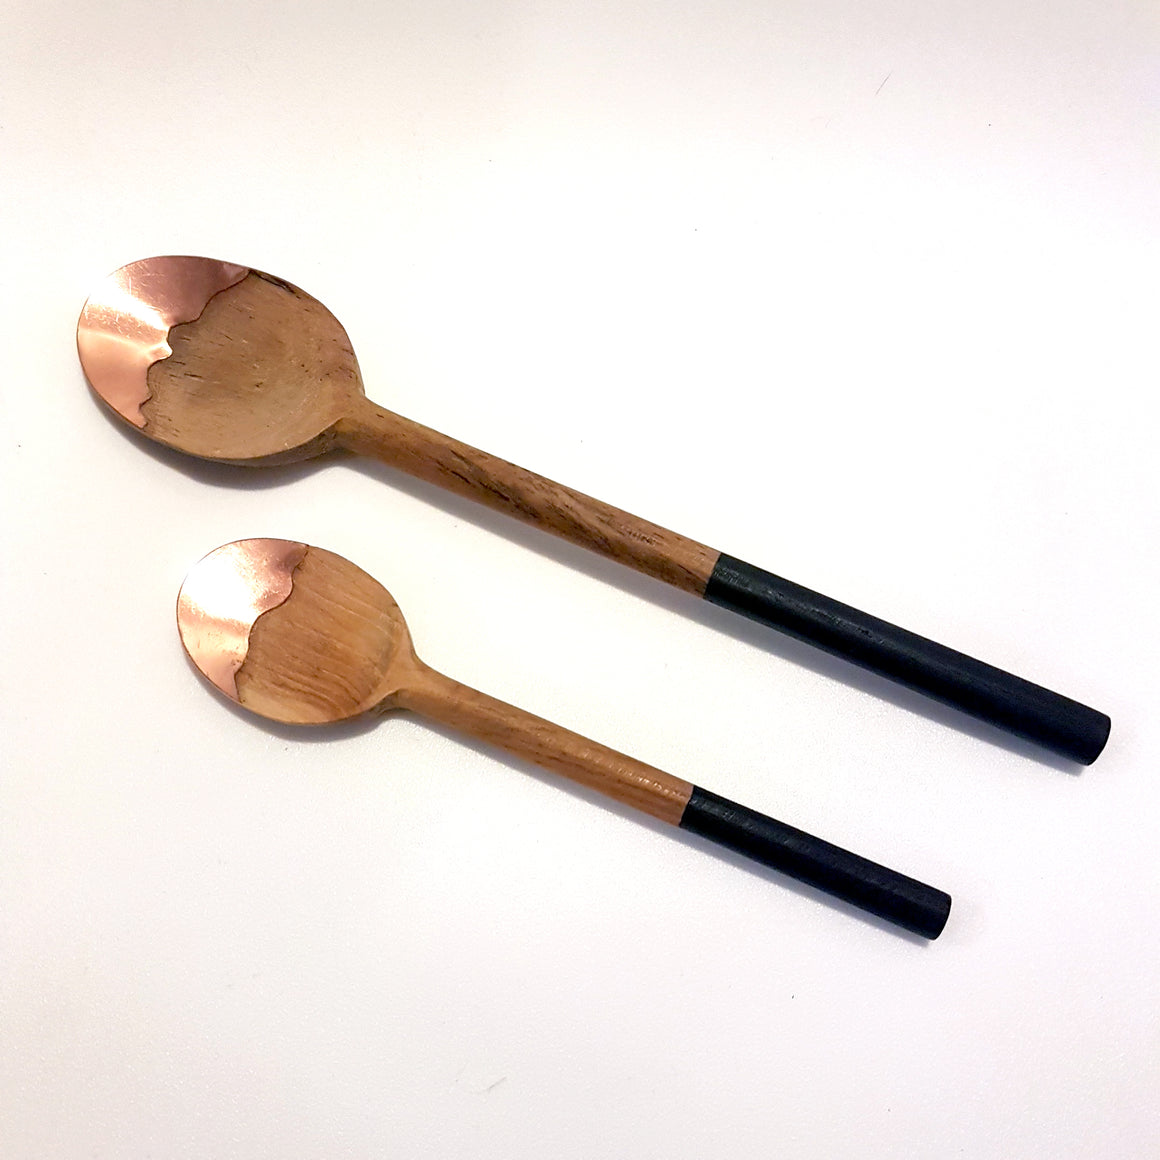 Large wooden spoon with copper tip